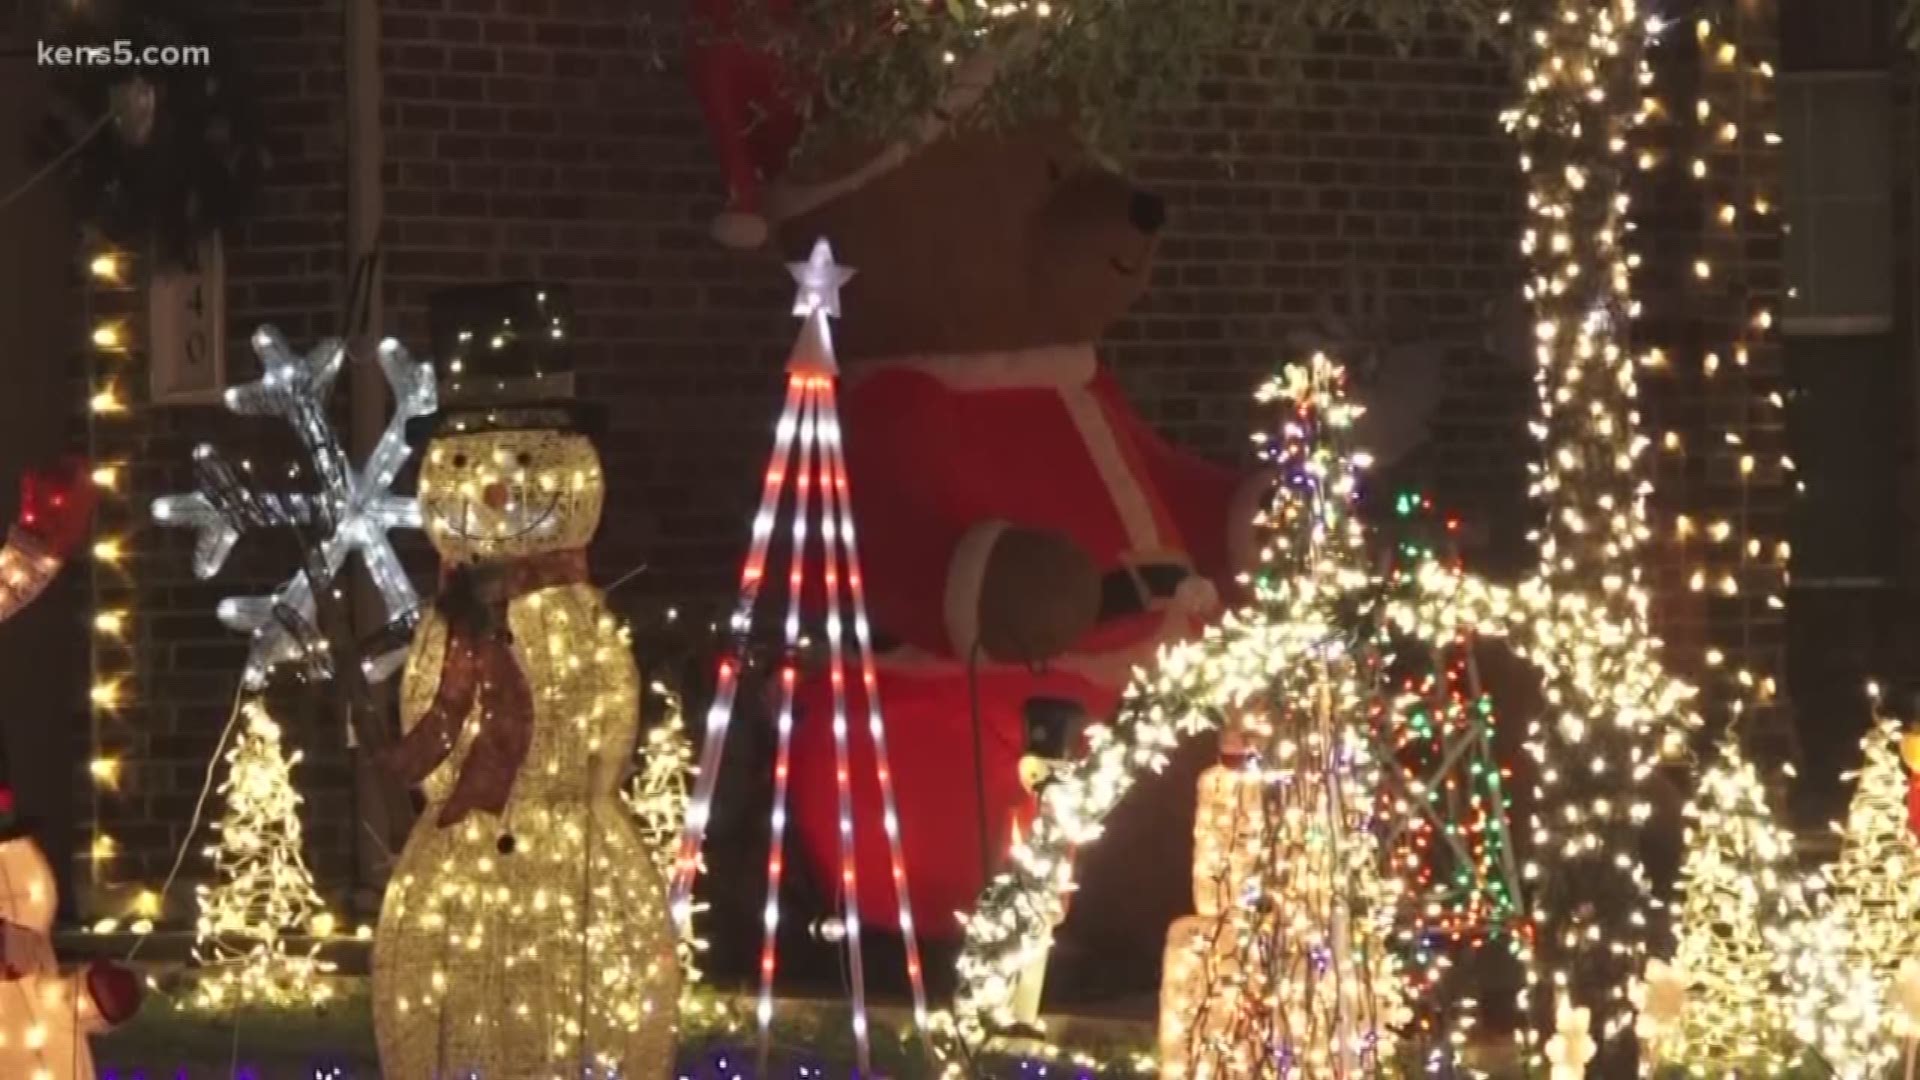 For the second straight year, a Boerne family's Christmas lights display is going viral. Now, they're using their popularity for a good cause.